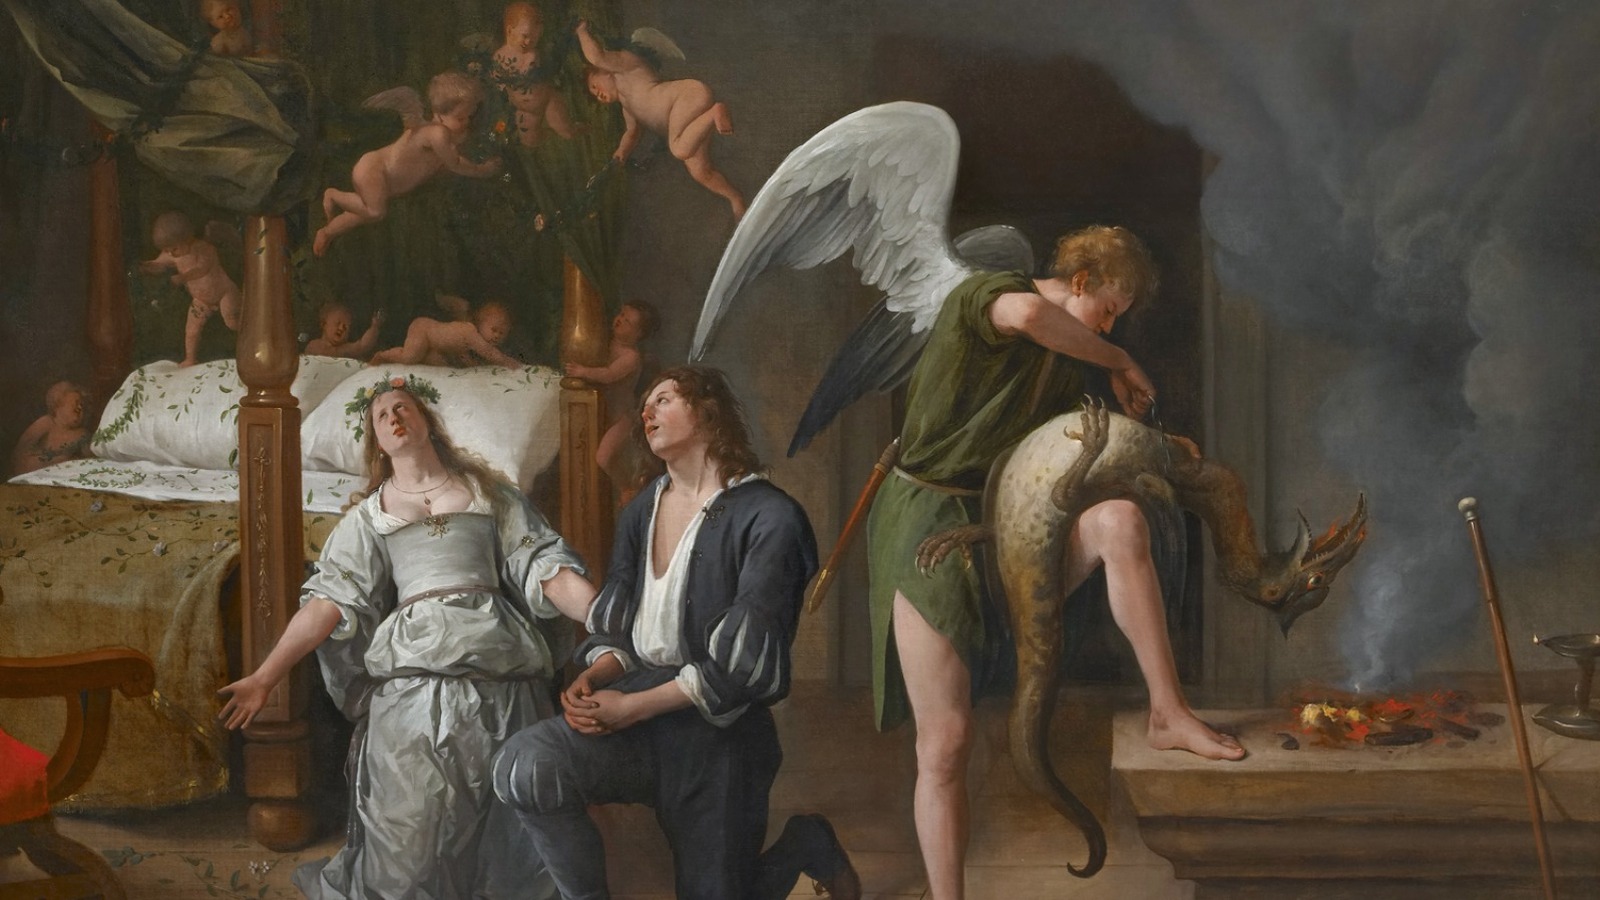 The Archangel Raphael: The Untold Truth